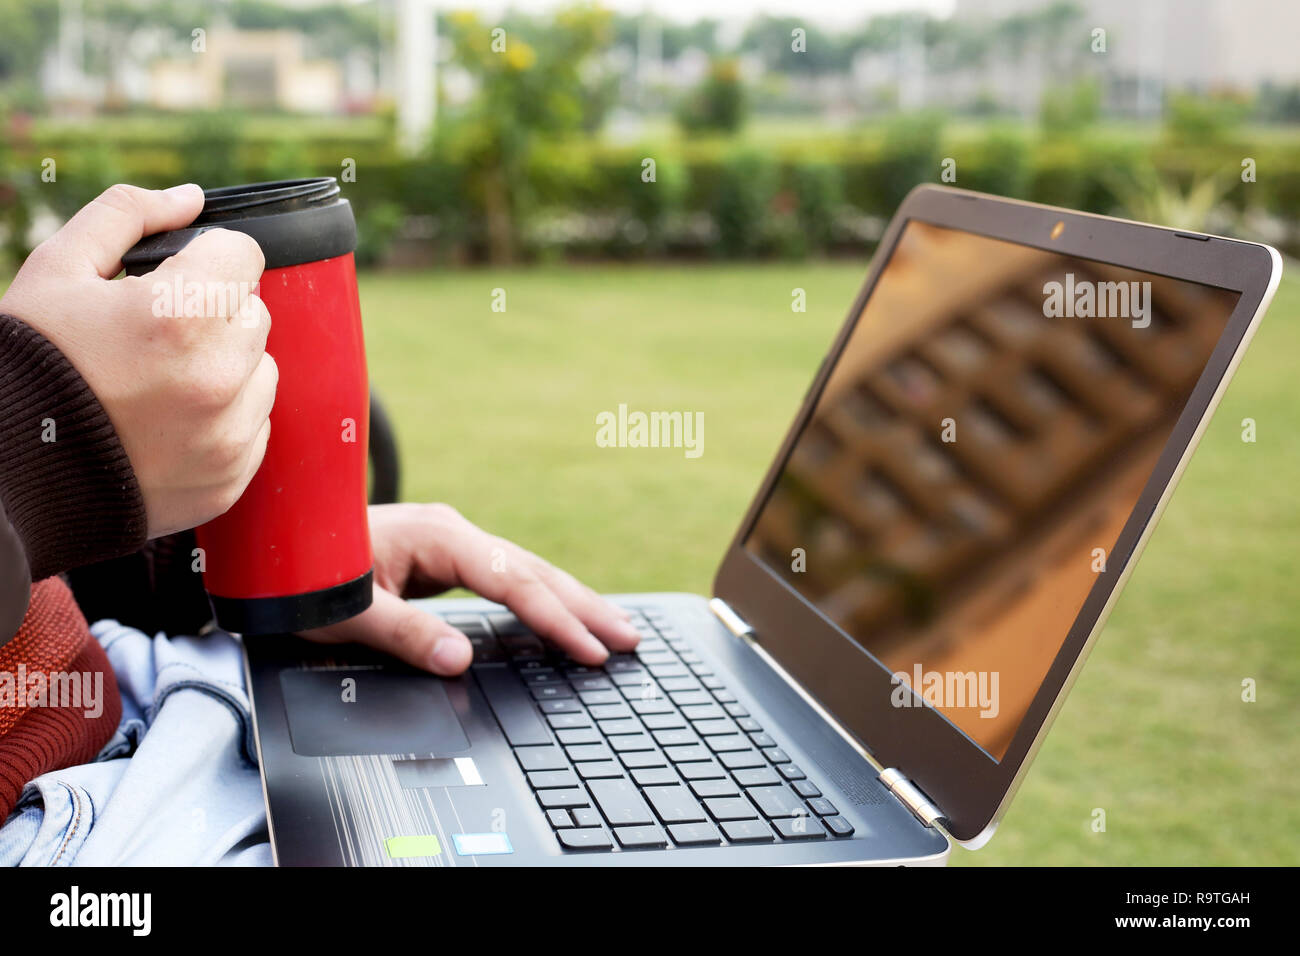 Boy est holding water bottle in hand with laptop Banque D'Images